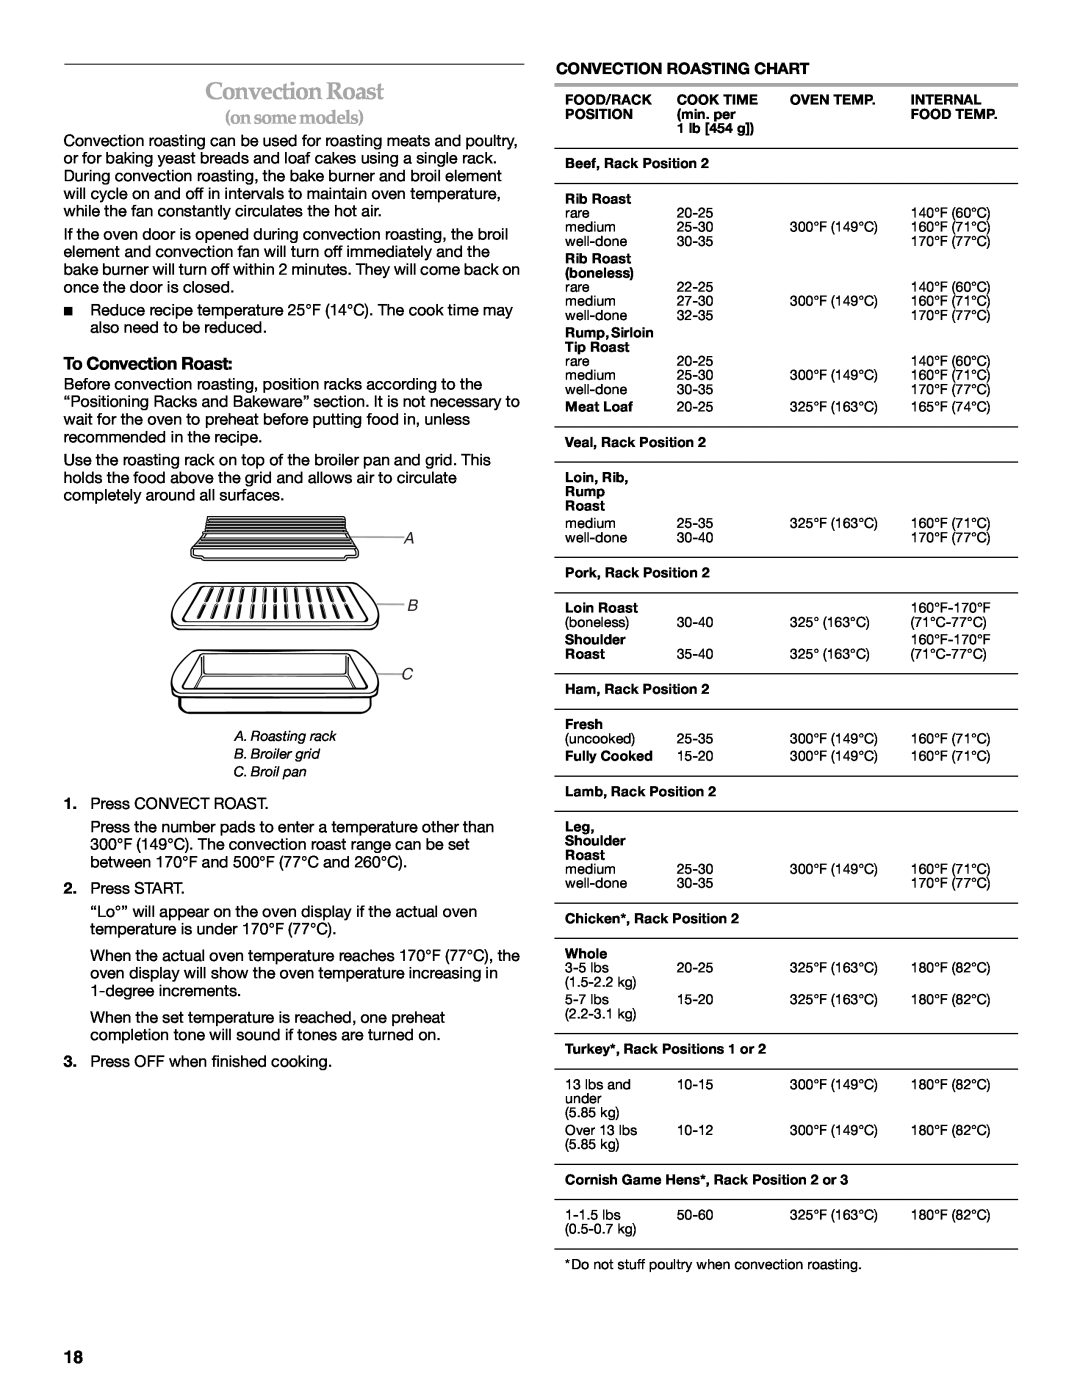 KitchenAid KGRI801 manual on some models, To Convection Roast, A B C 